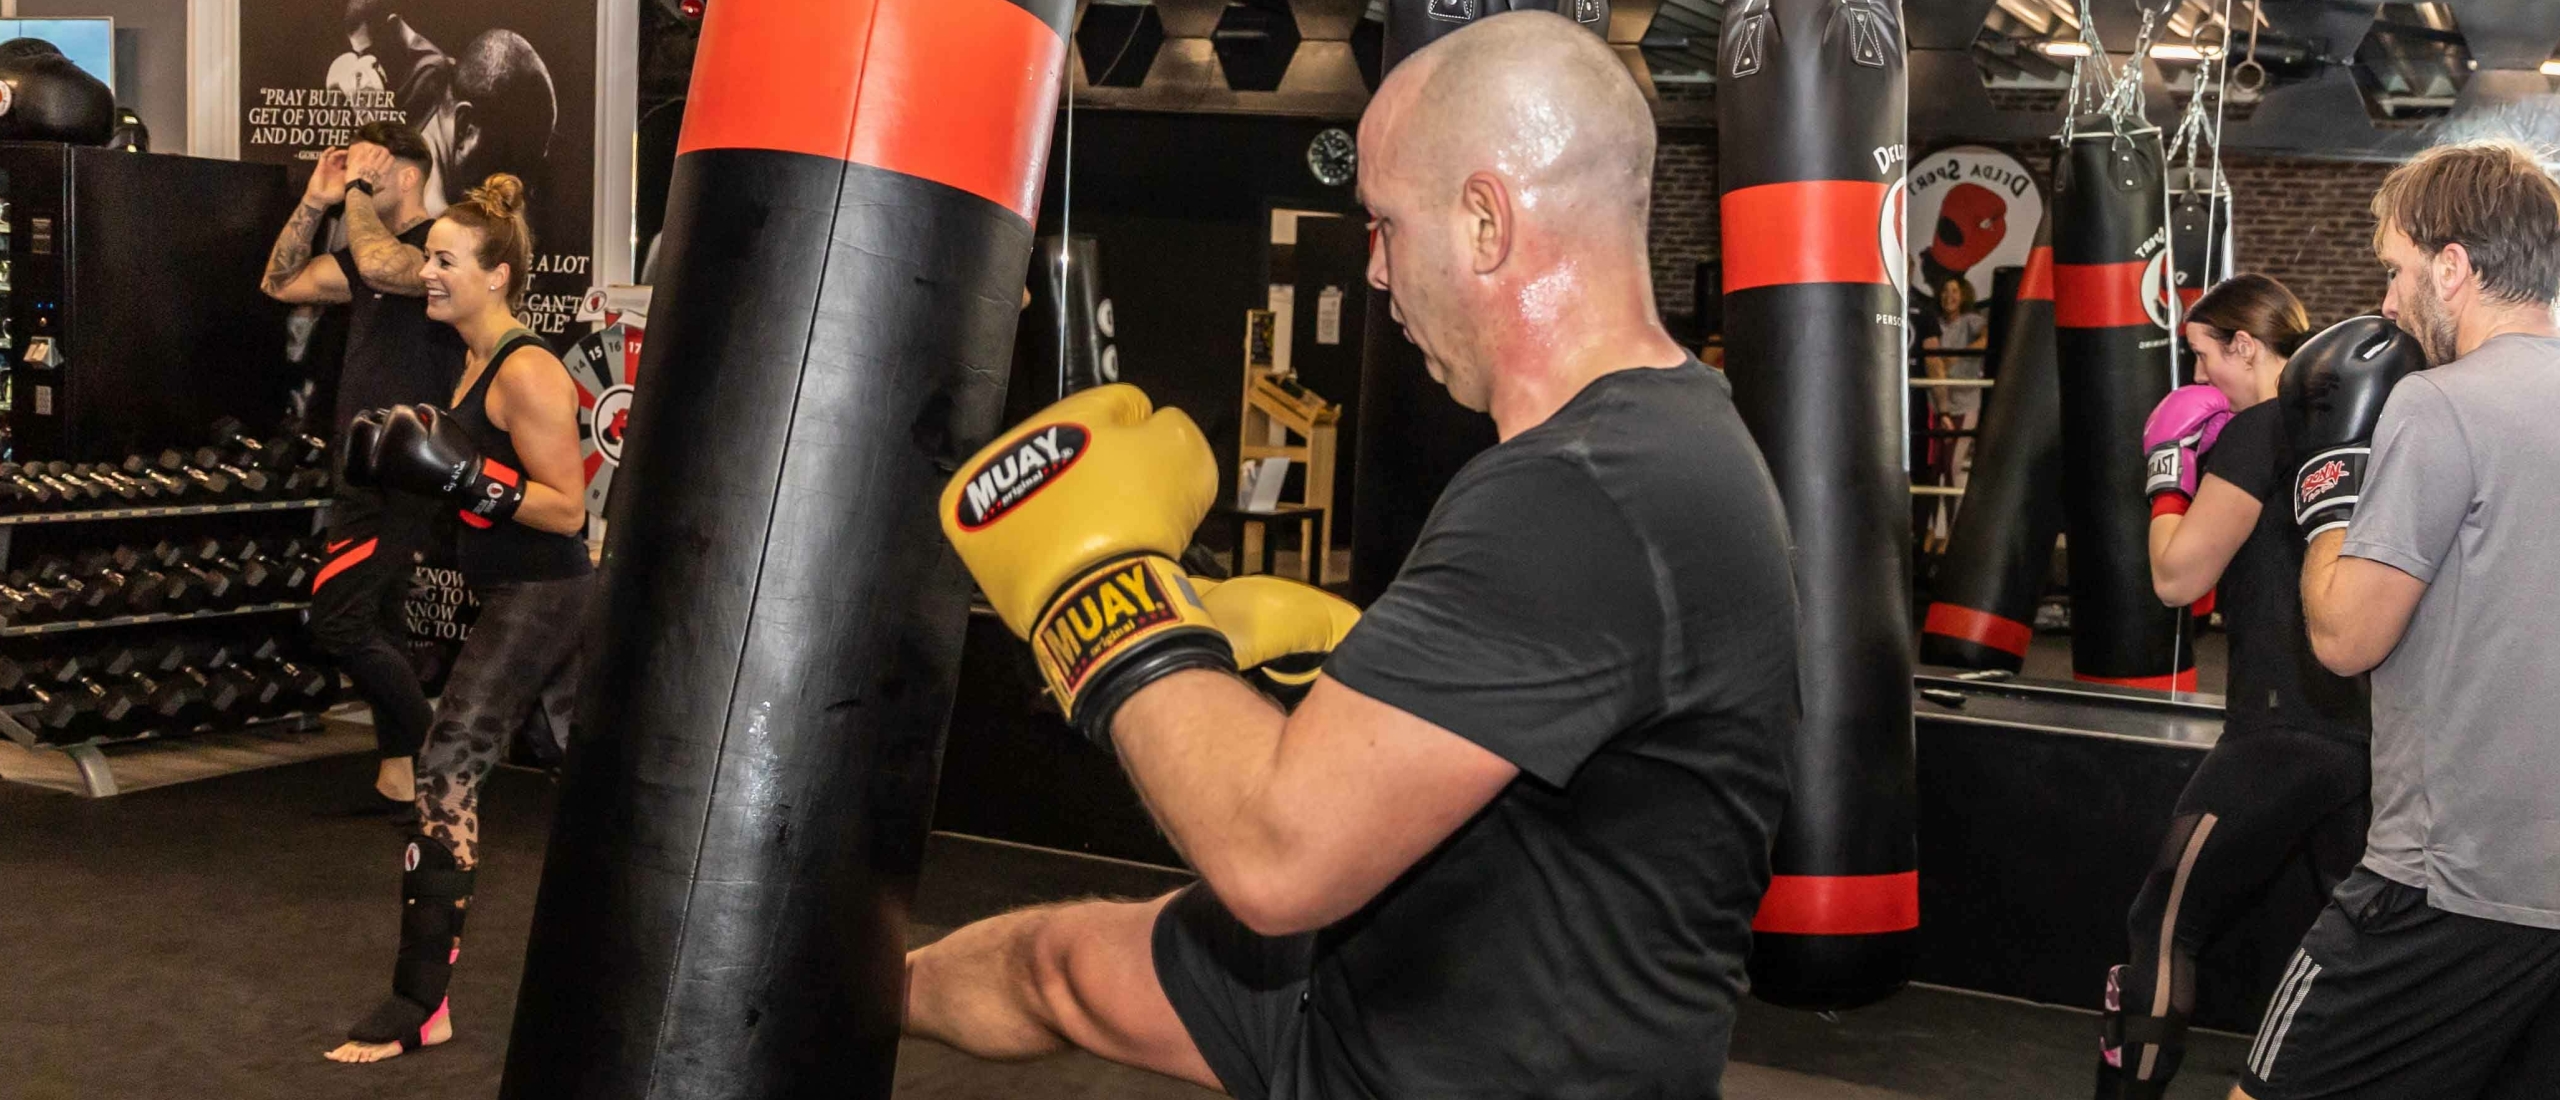 Is Kickboxing Good for Weight Loss?